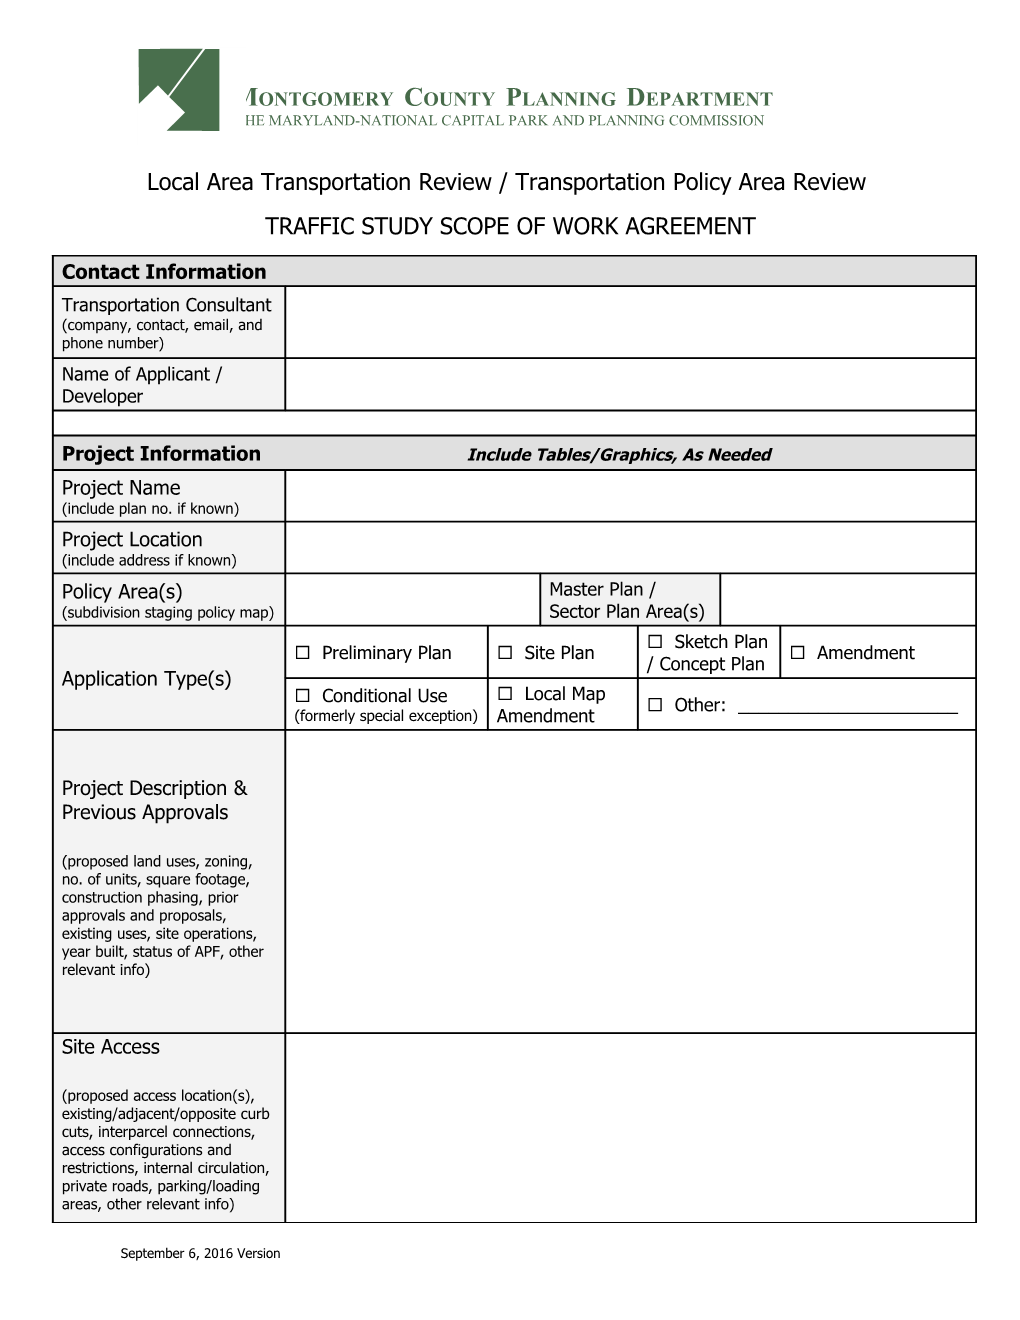 Local Area Transportation Review / Transportation Policy Area Review